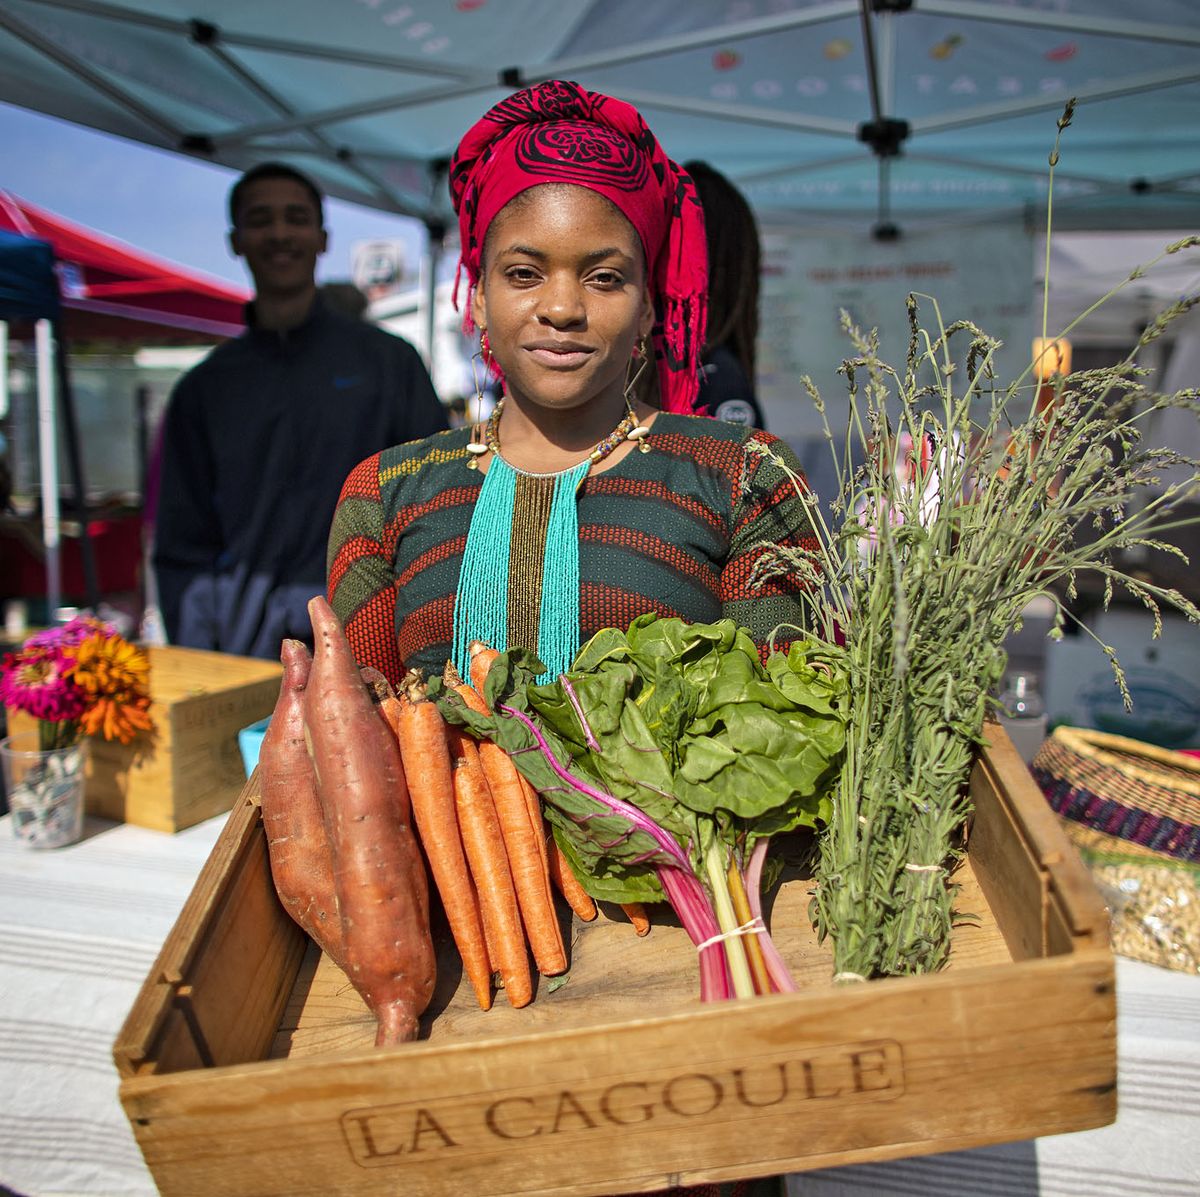 june 15, 2019   los angeles, california, united states olympia auset is the owner and founder of s‹prmarkt, allow cost organic grocery servicing low income communities in la on june 15, 2019 in los angeles, california on a recent saturday, she was selling her organic produce at leimert park villagegina ferazzilos angelestimes